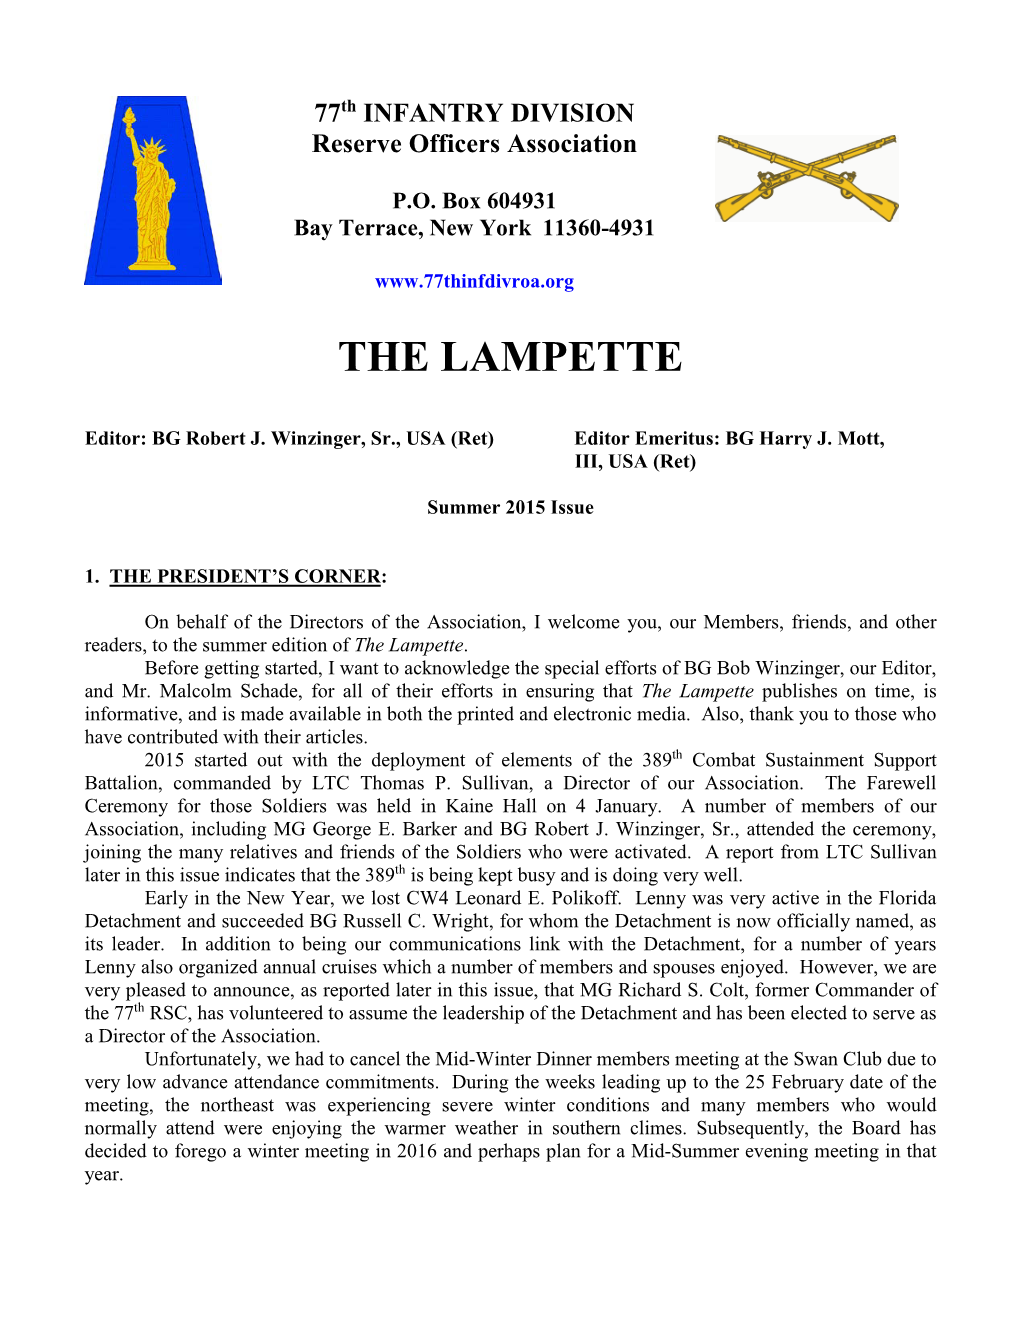 The Lampette